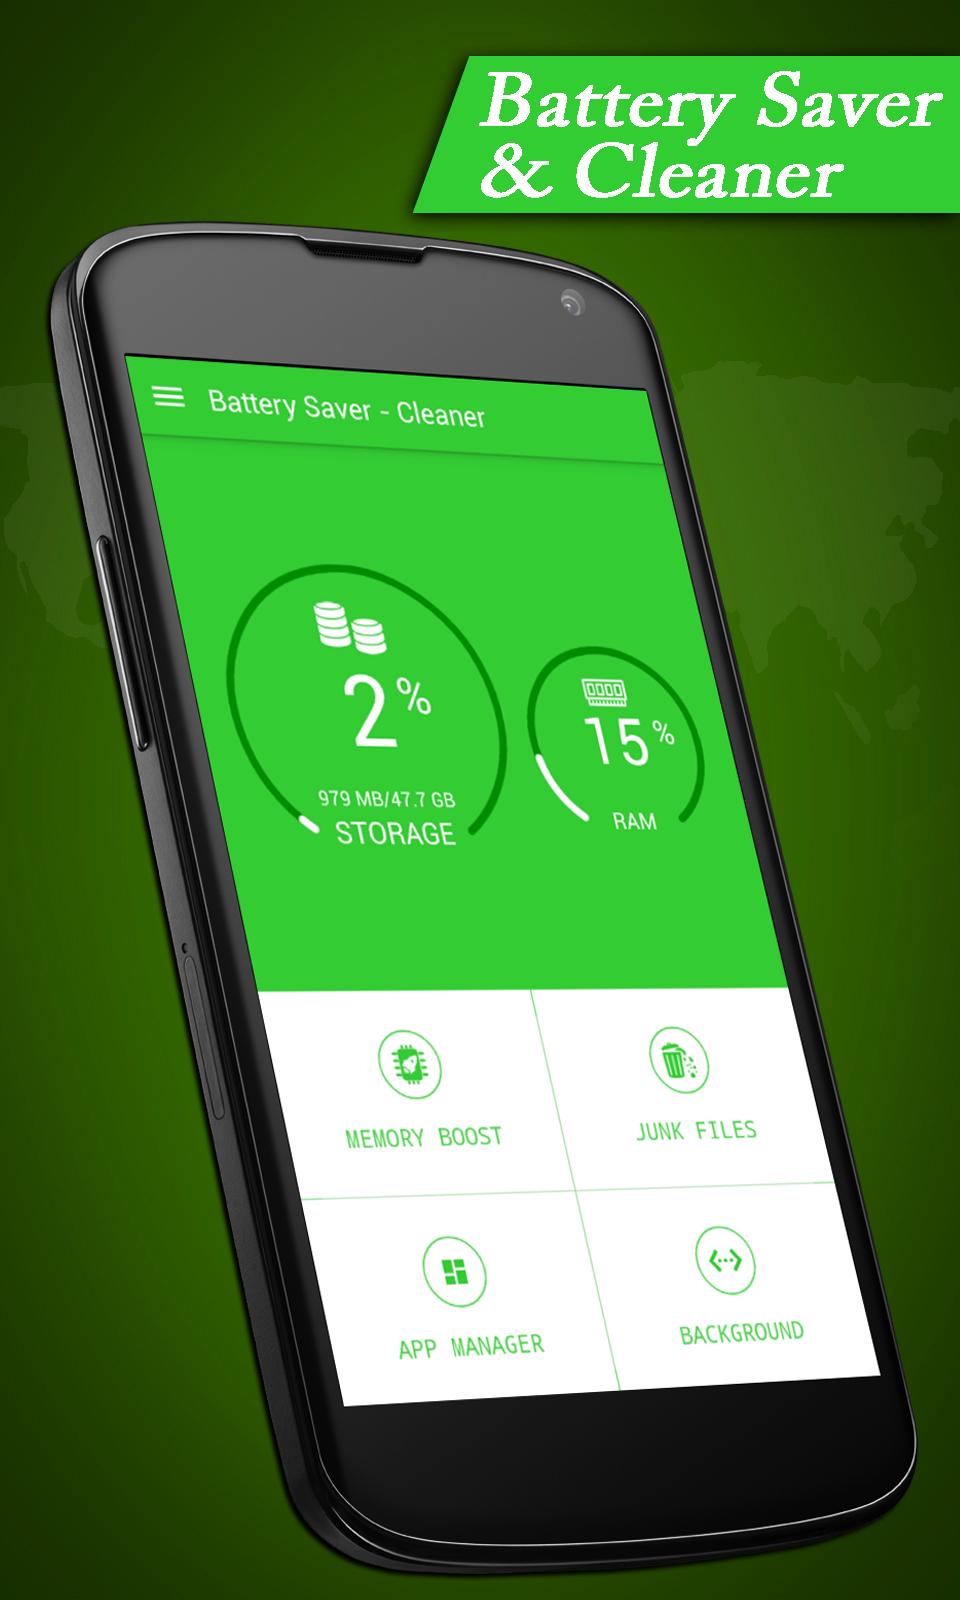 Battery Saver - Cleaner for Android - APK Download